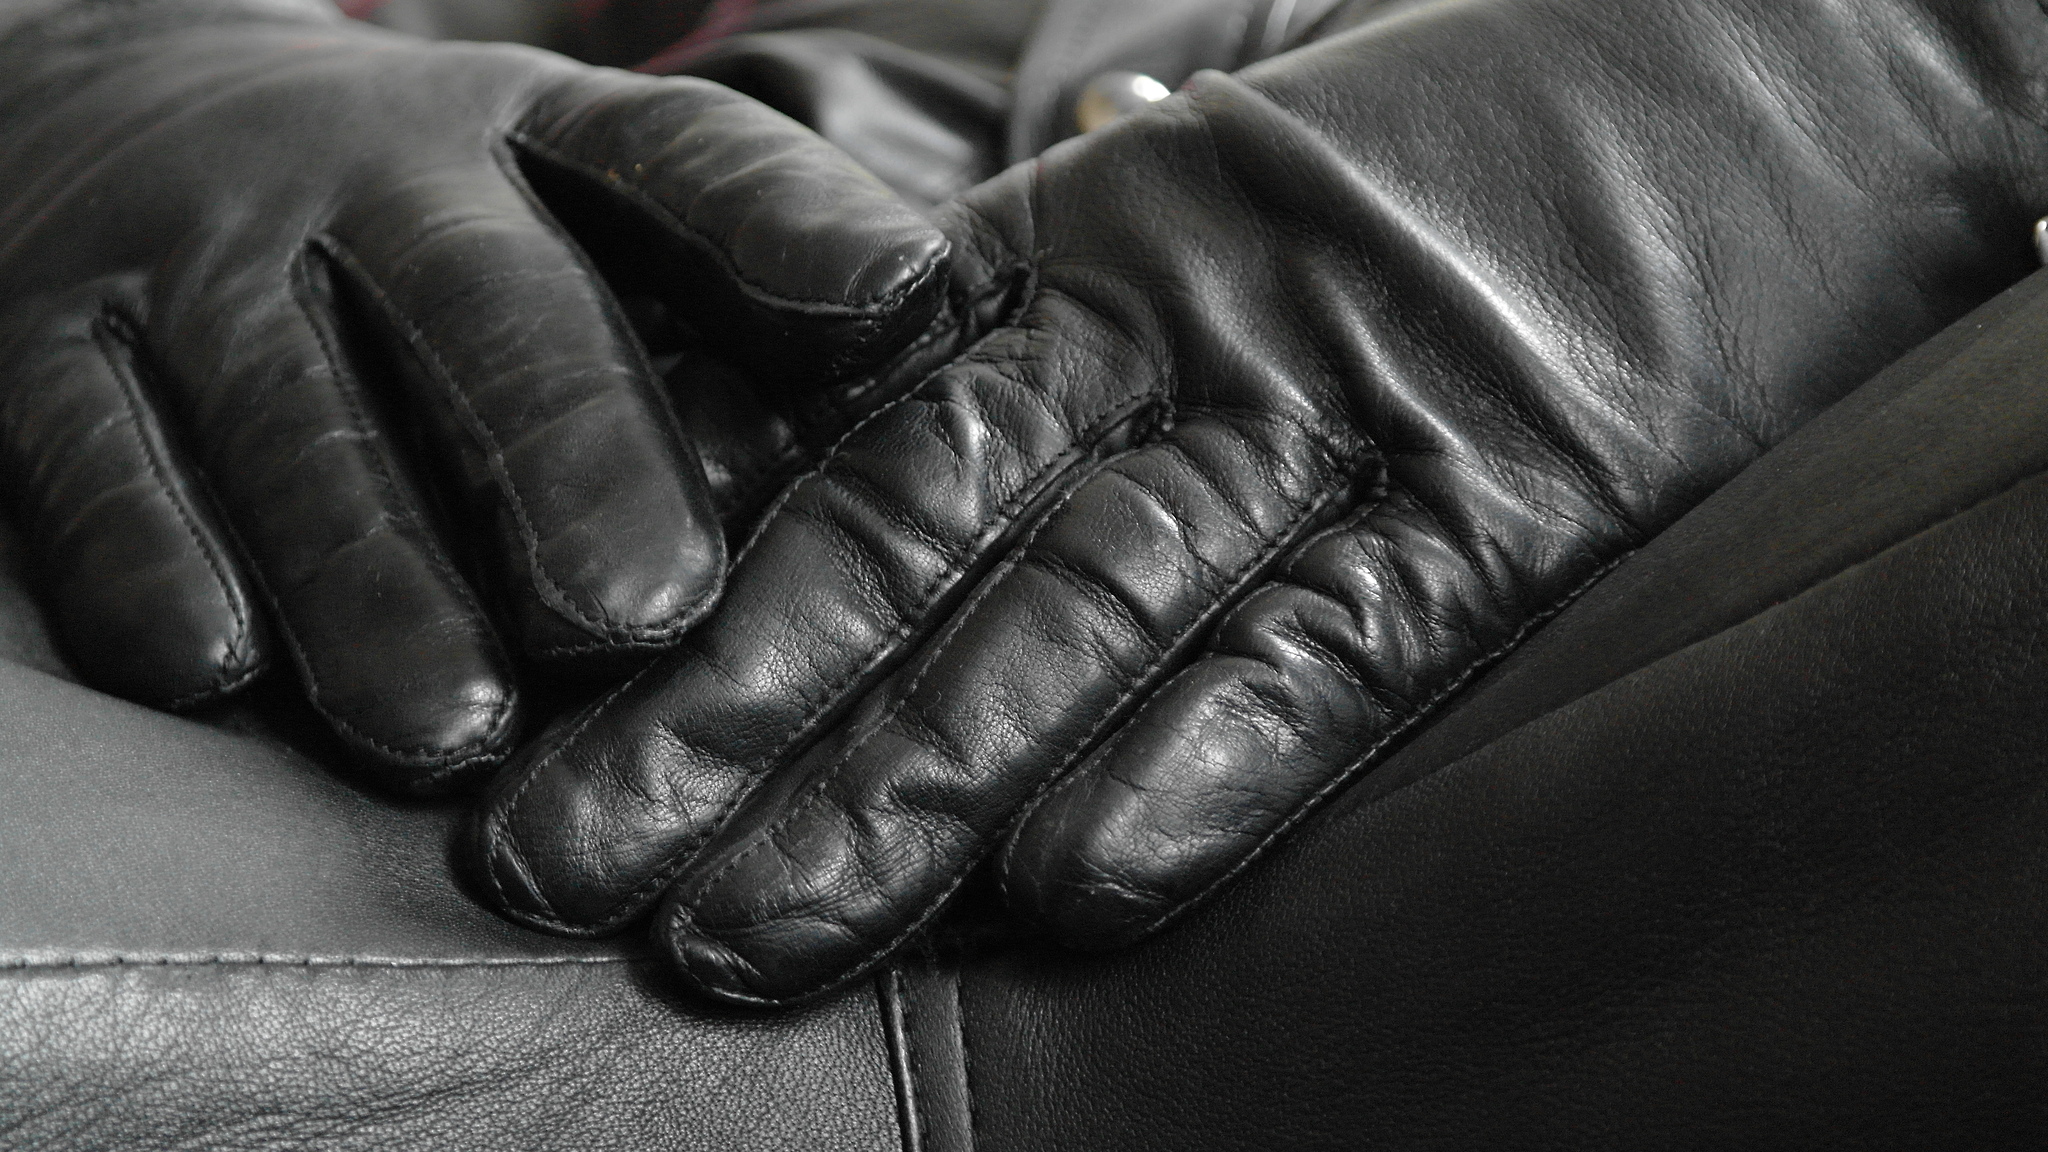 dan petermann recommends Addicted To Gloves Tumblr